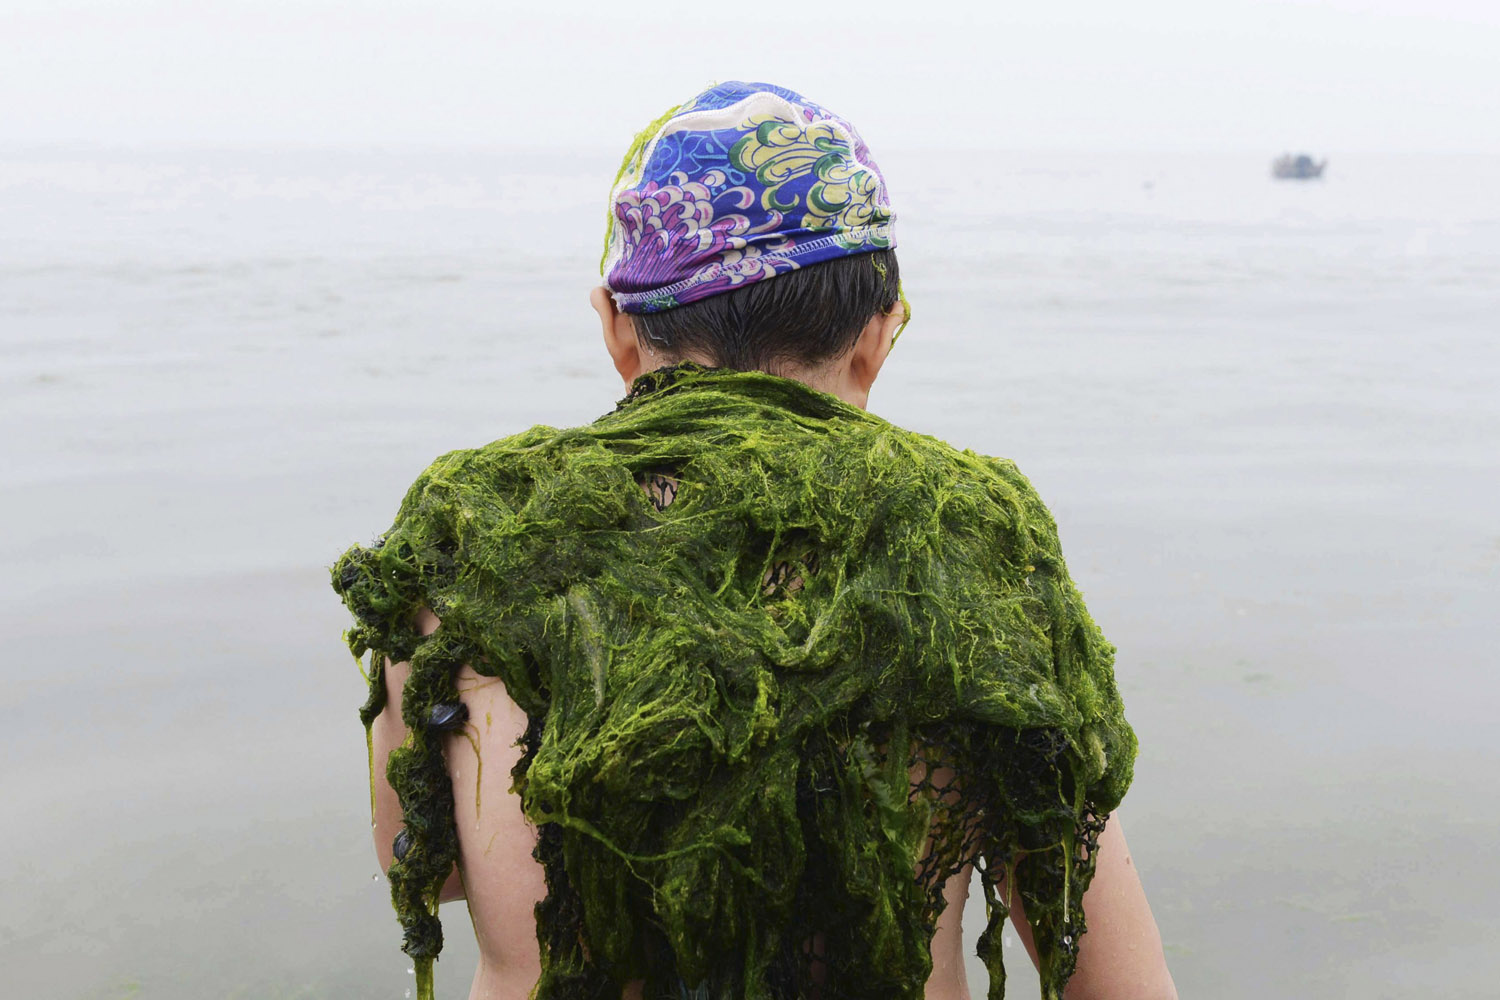 June 22, 2013. Algae is pictured on the shoulders of a swimmer along the seaside in Qingdao, Shandong province.